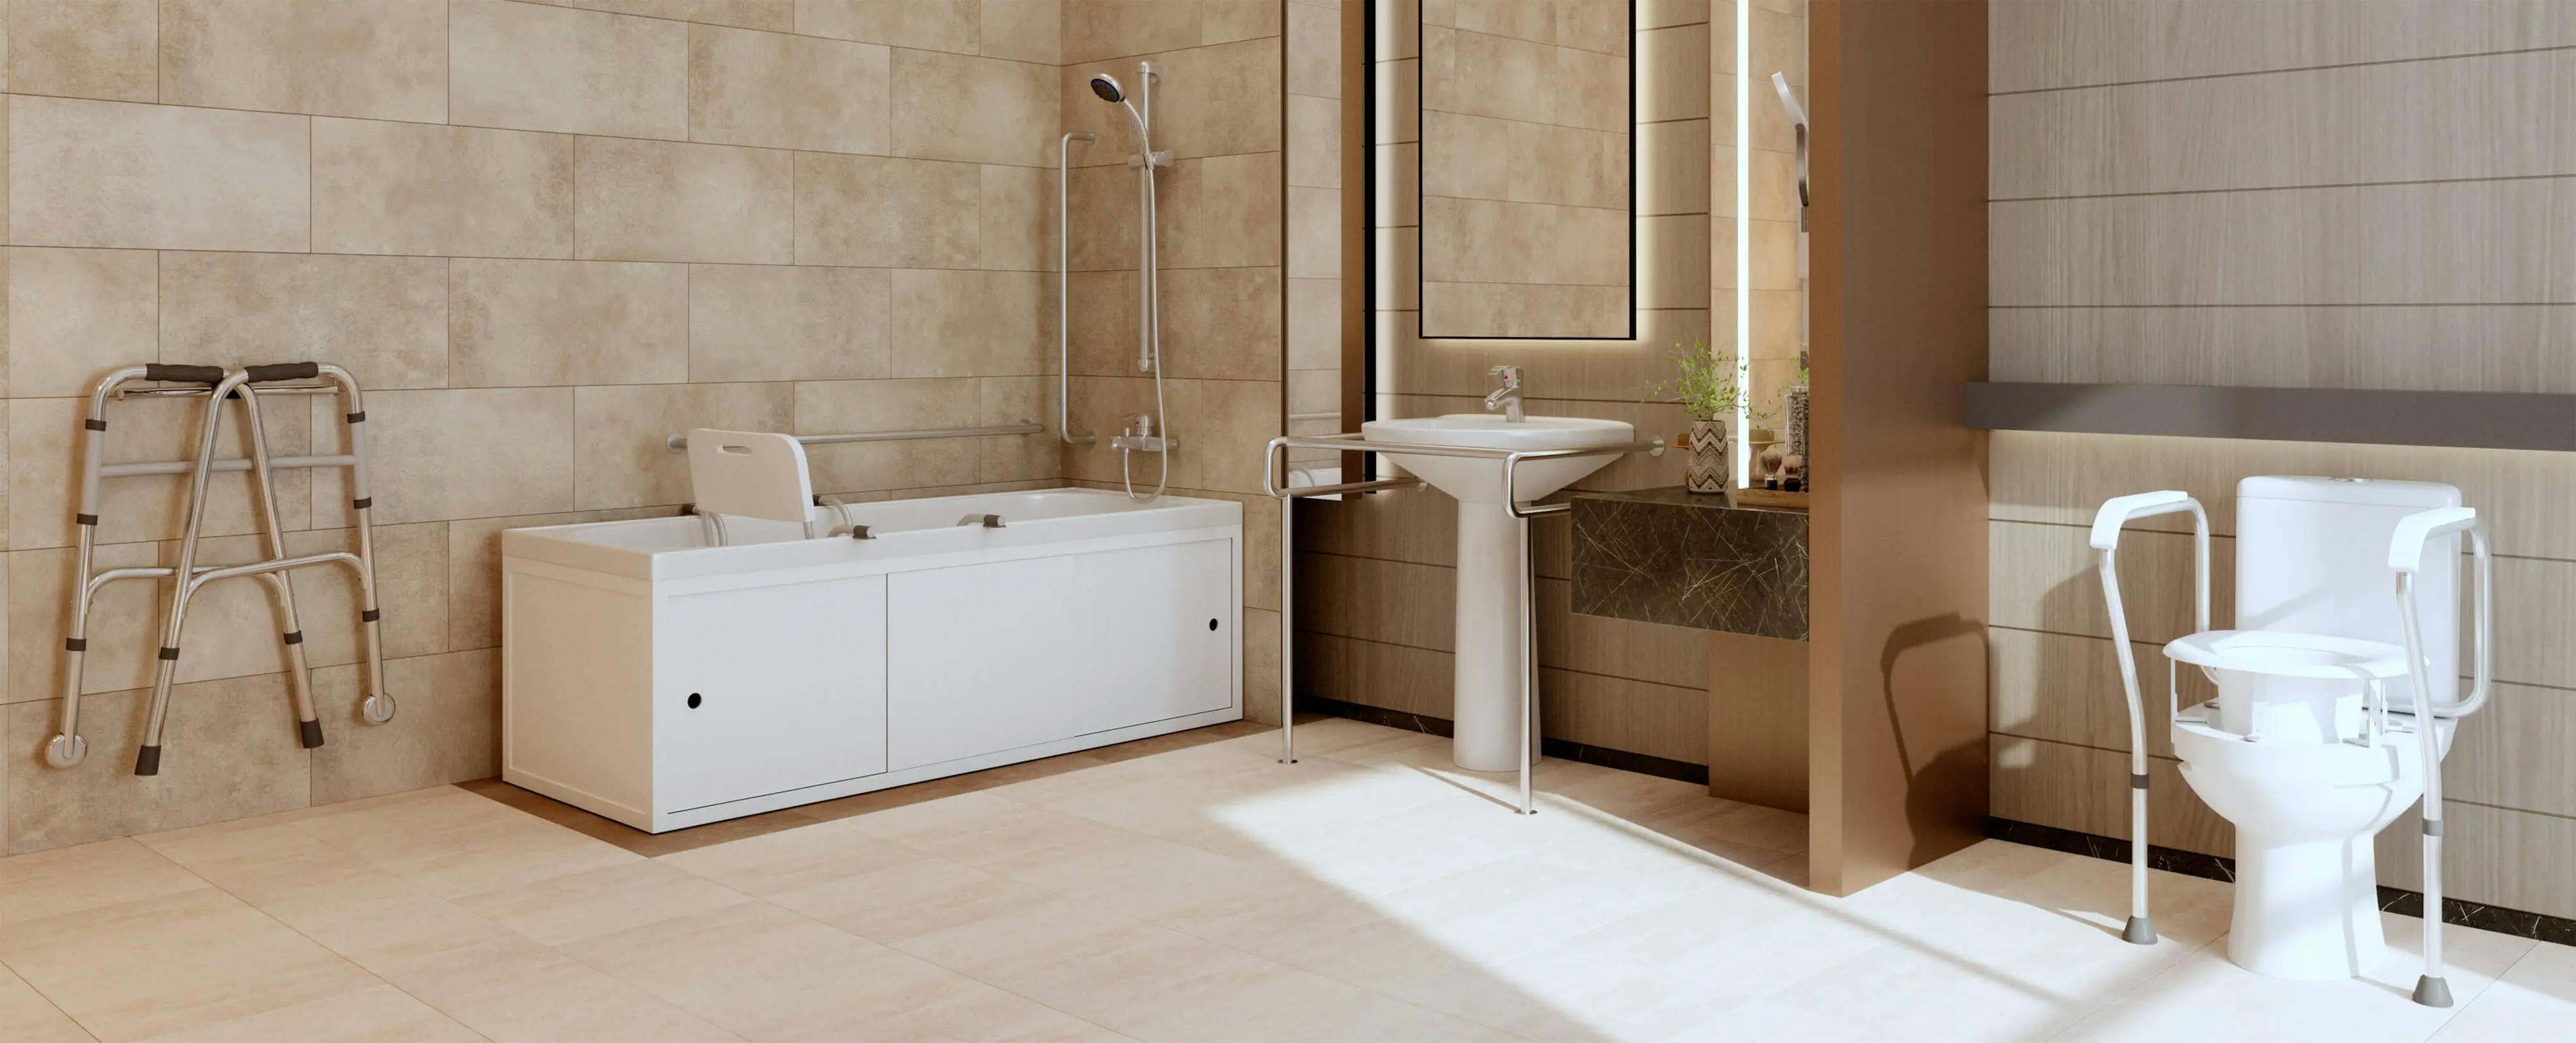 A sunlit, modern bathroom with cream-coloured tiles throughout. On the far left there is a walking assist device. Beside sits a bath and shower with a sliding seat and various bars for gripping. Further along we have a sink with bars again surrounding it for grip, and space beneath for chair access. Above the sink sits a mirror, well-lit from both sides. On the right of shot sits the toilet, with side arms and vertically adjustable seat.